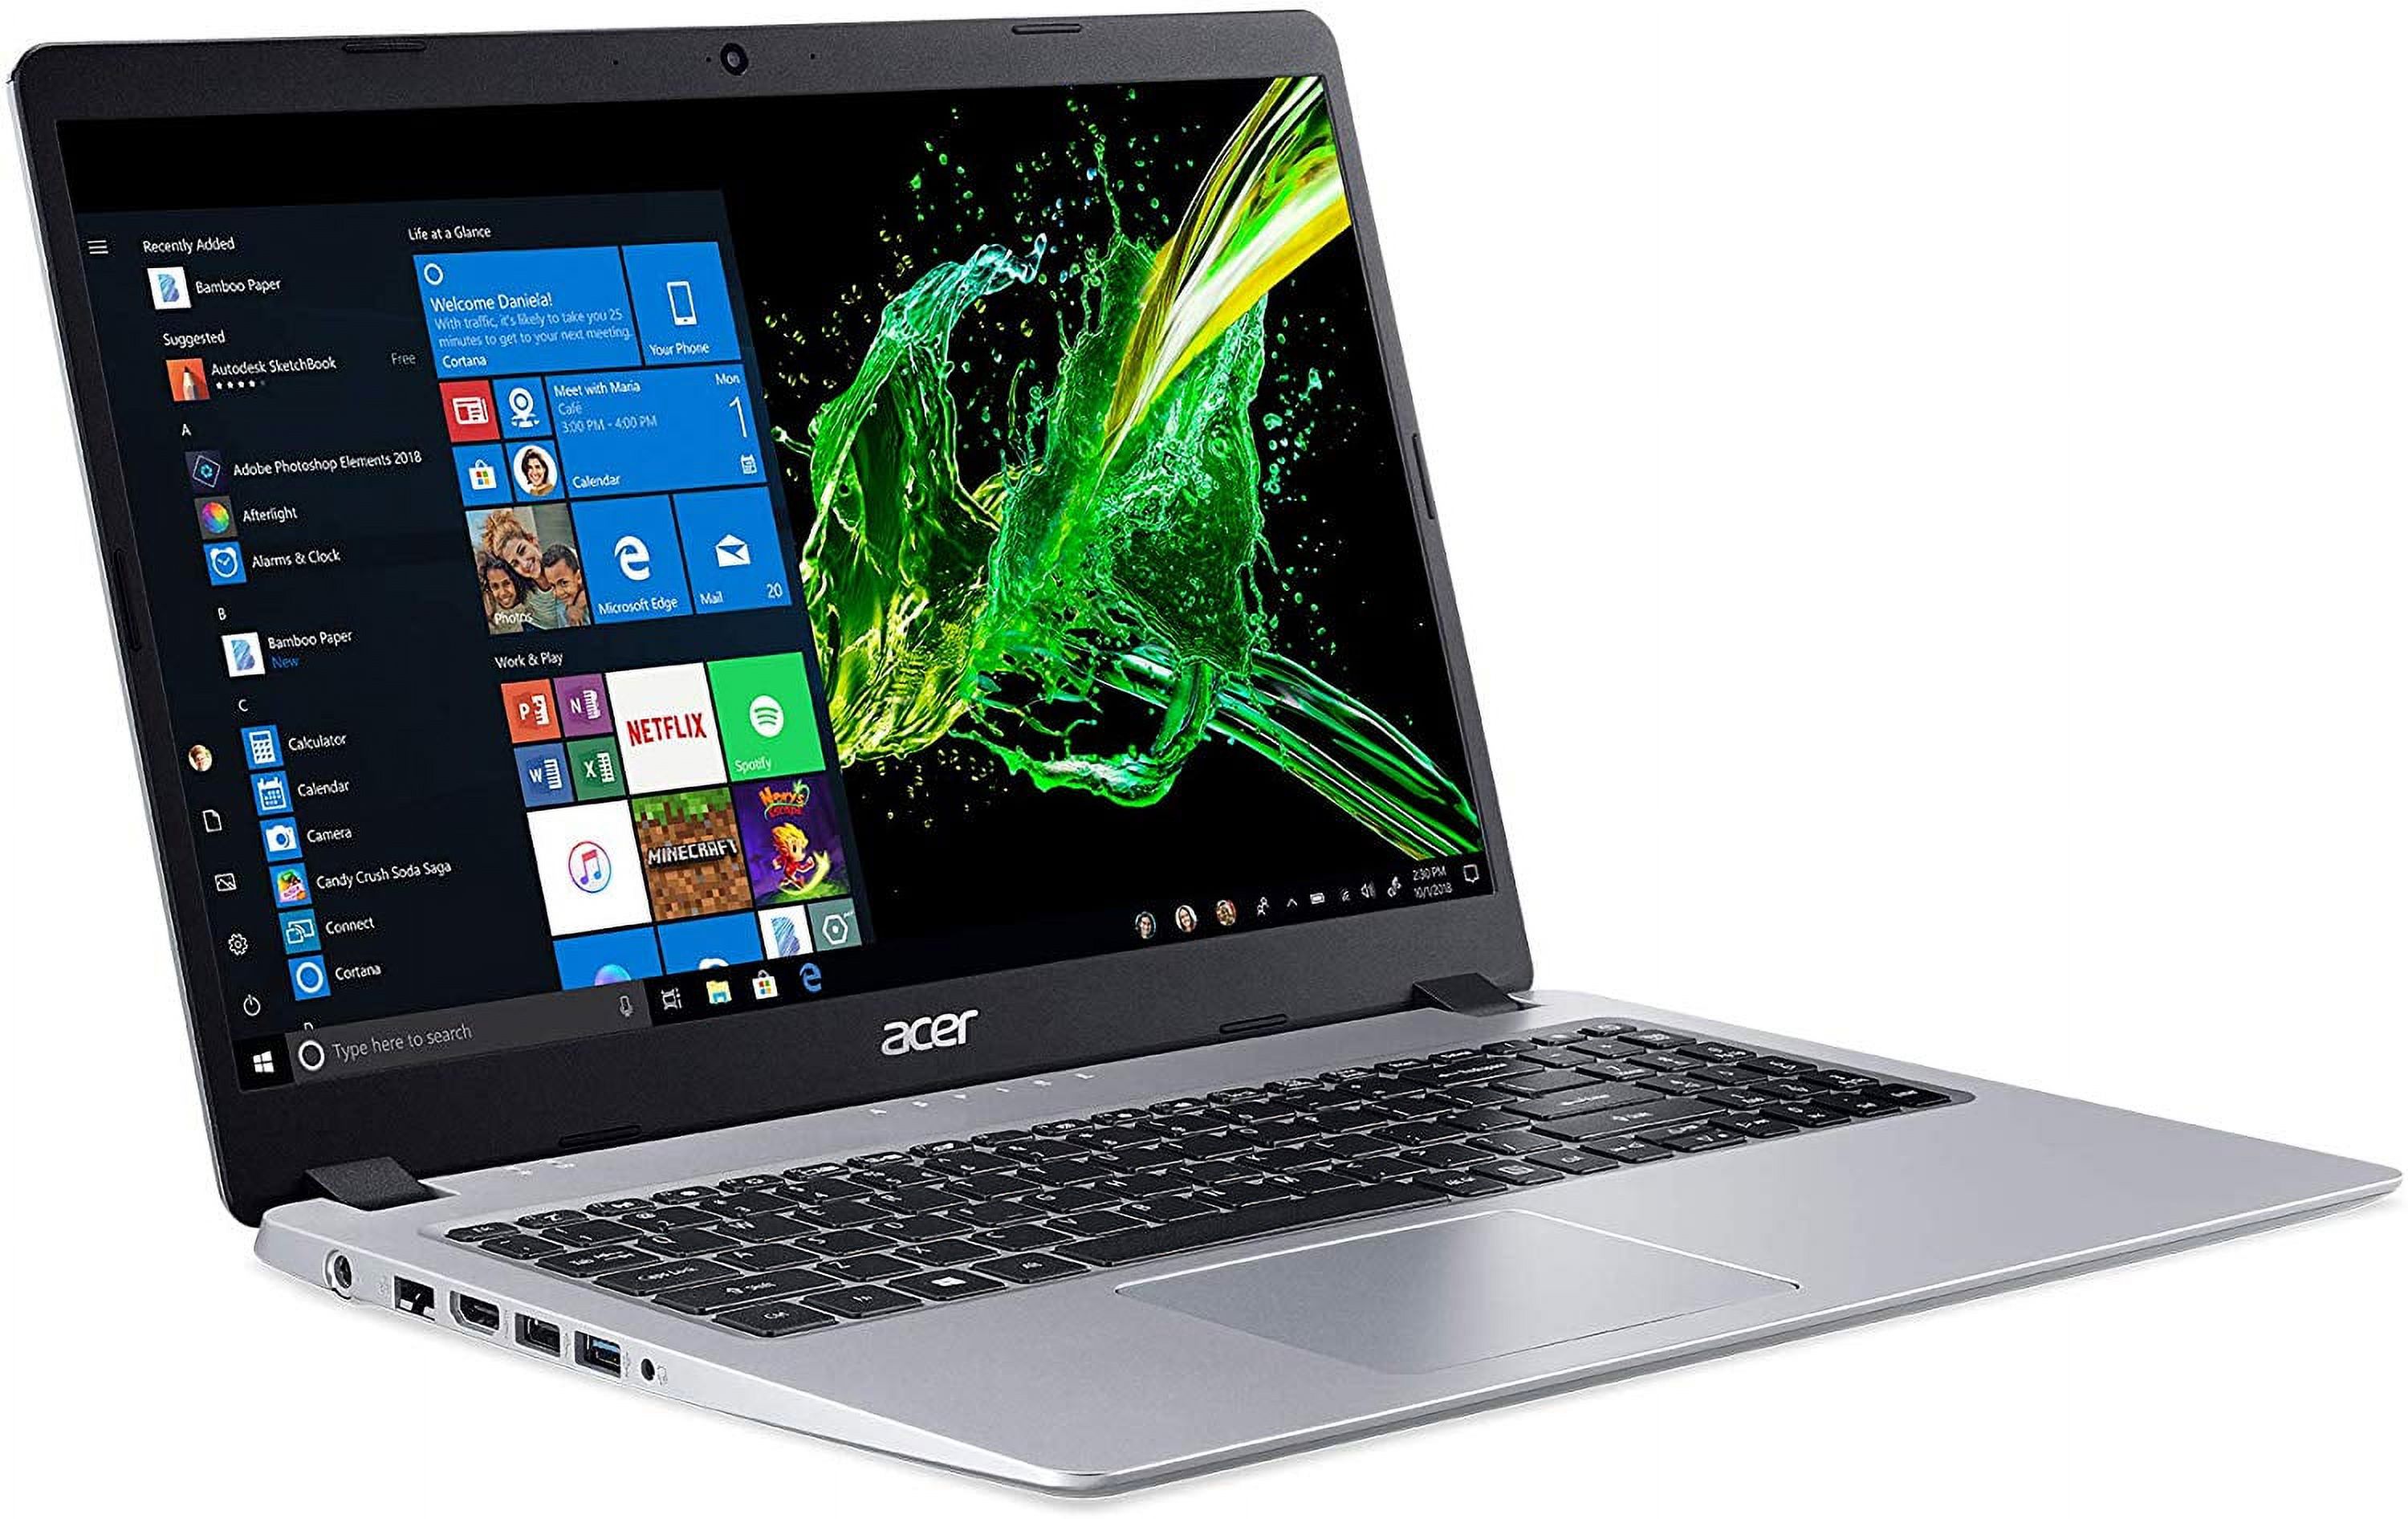 Acer Aspire 5 Slim Laptop, 15.6 inches Full HD IPS Display Laptop - Silver - image 1 of 2